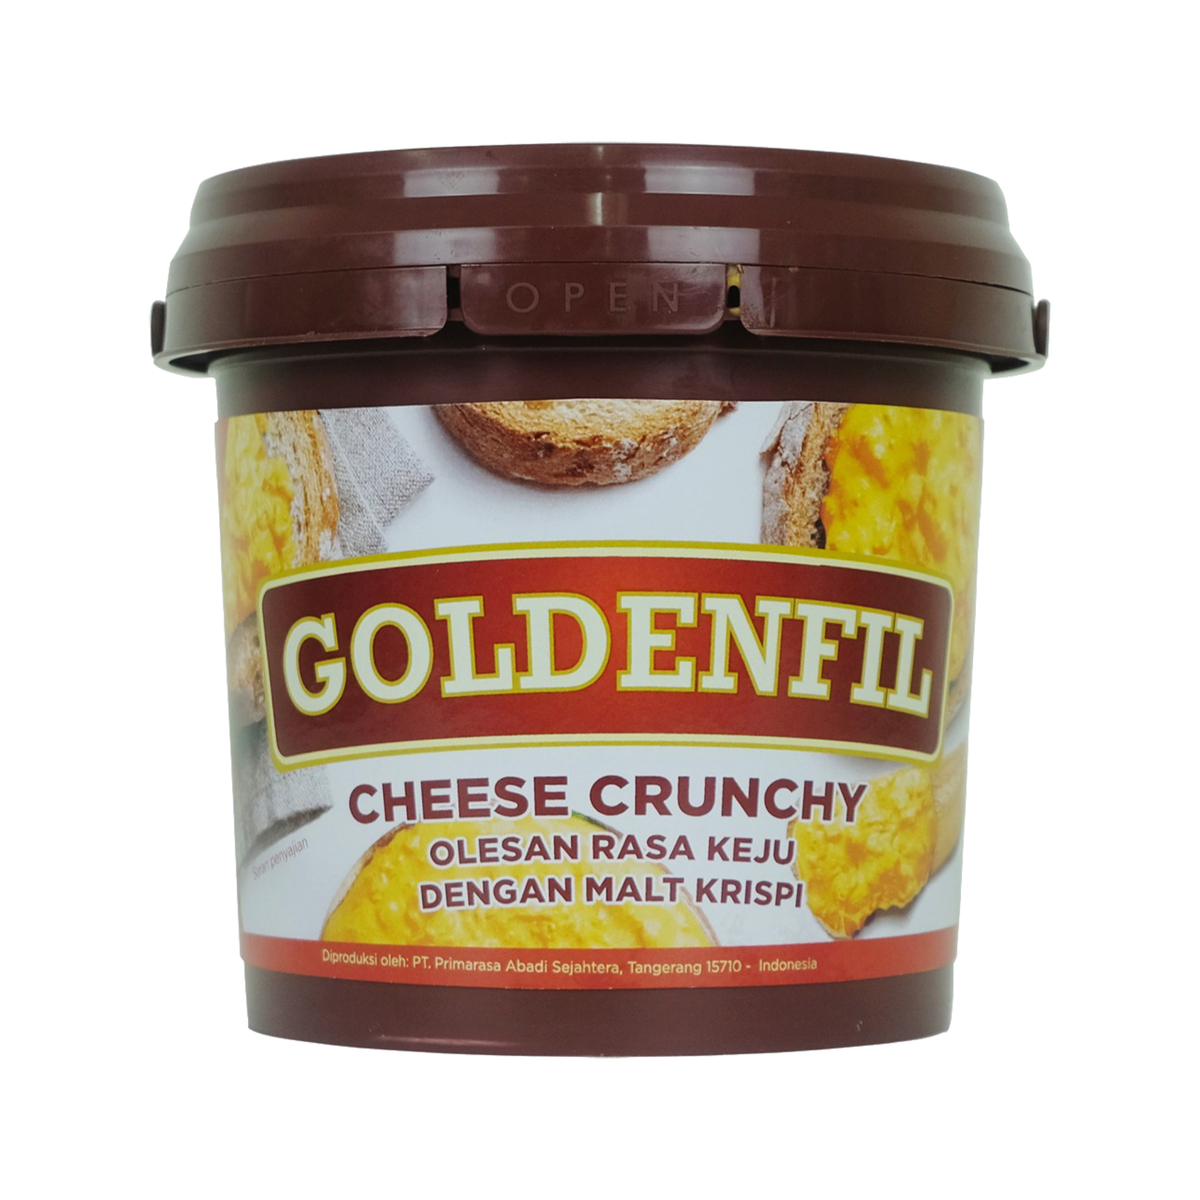 Goldenfil Savory Cheese Crunchy 1kg